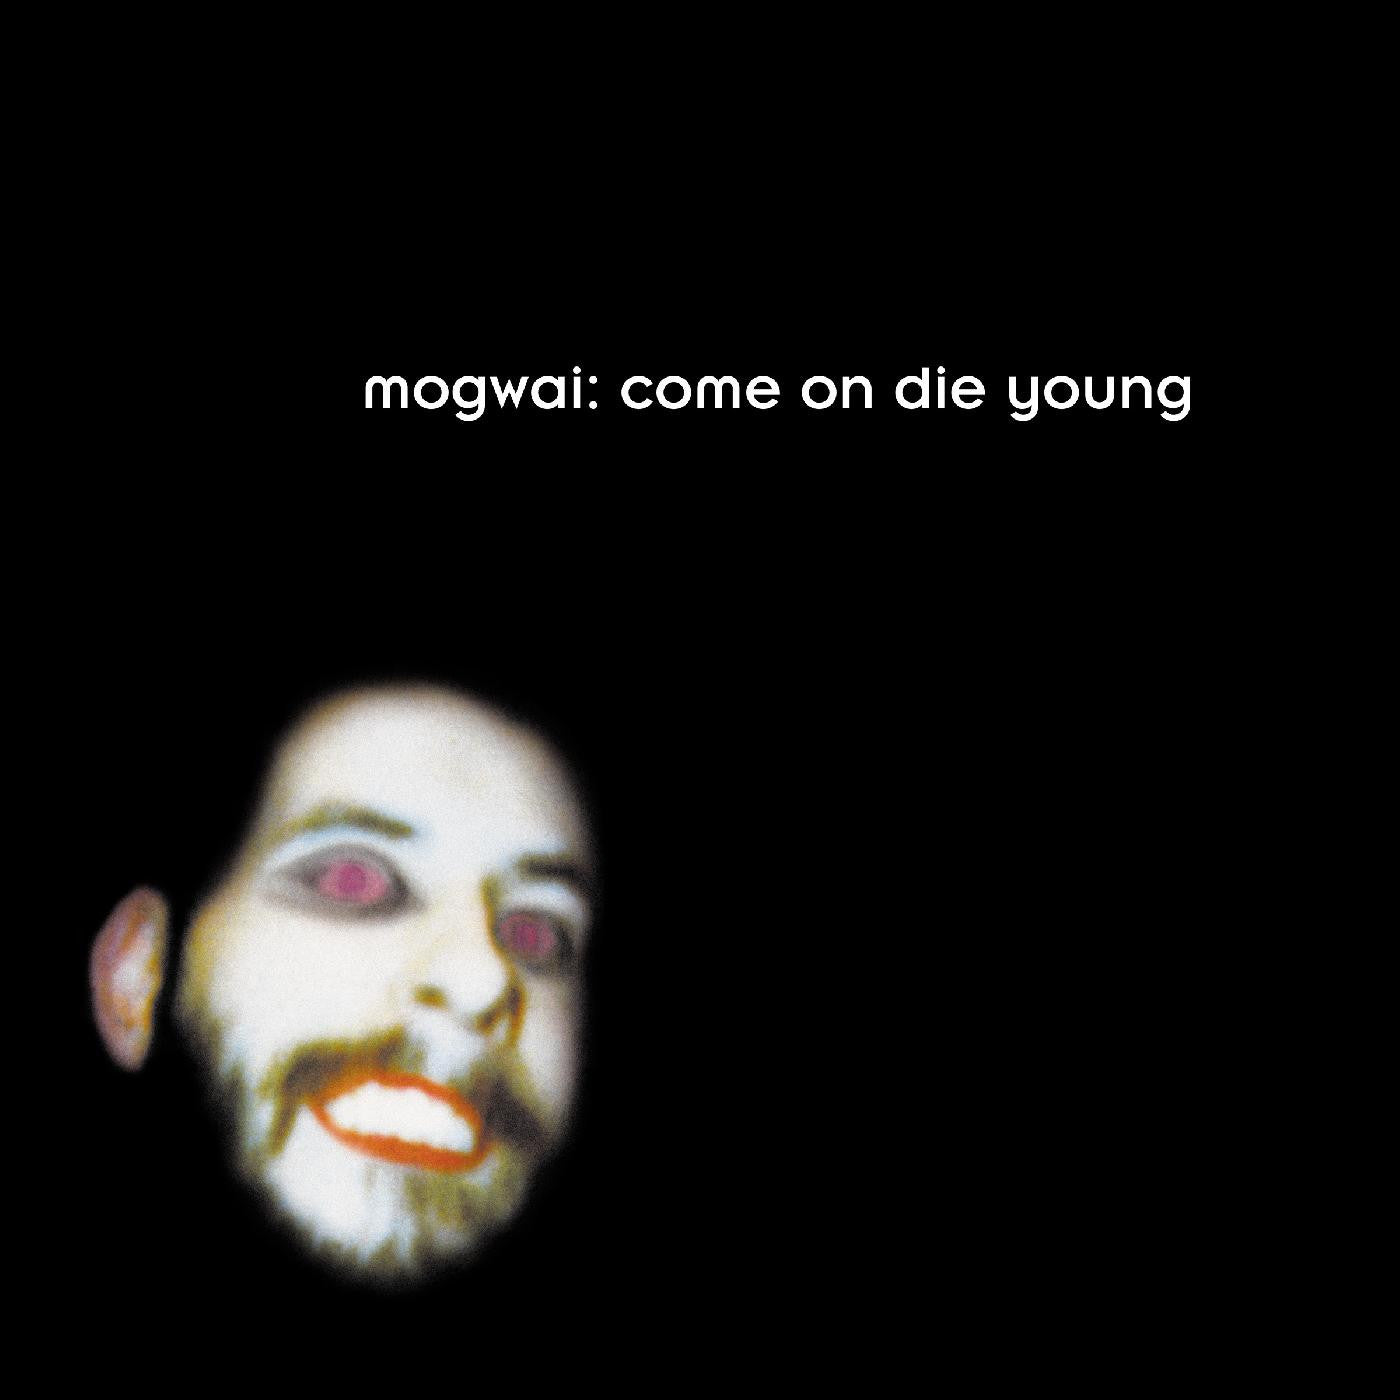 Mogwai - Come On Die Young 2LP